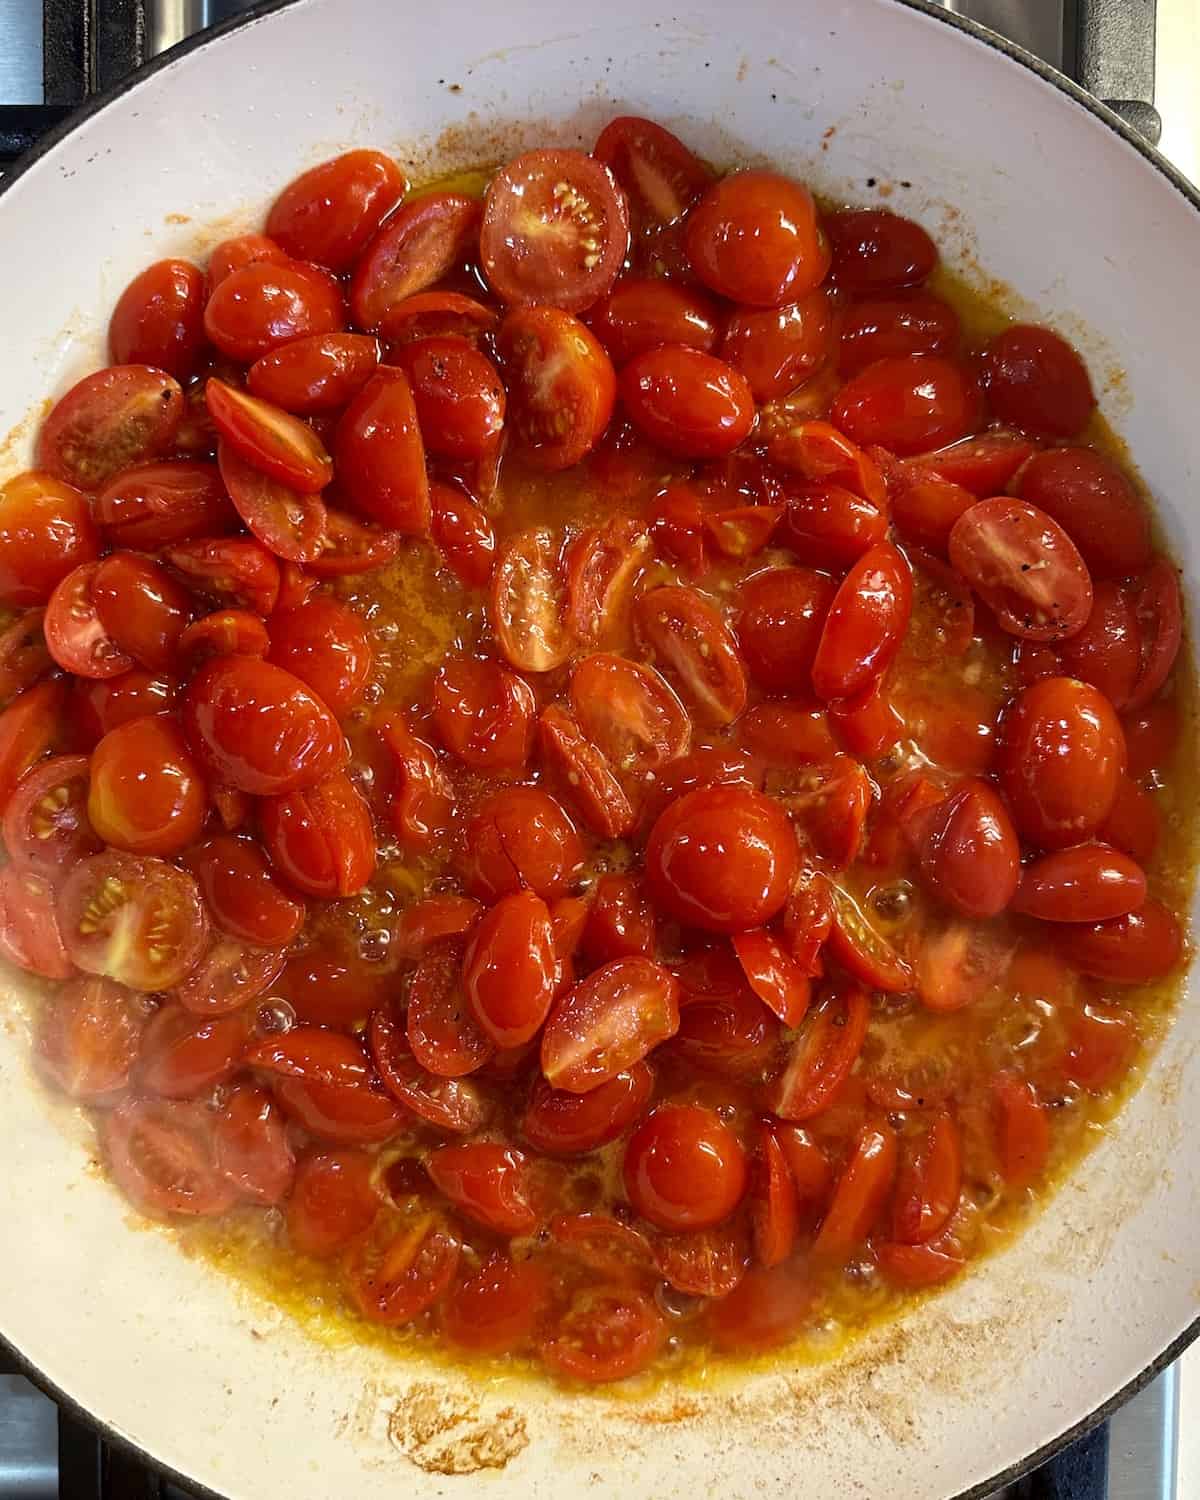 Halved cherry tomatoes in a medium skillet that have started to blister